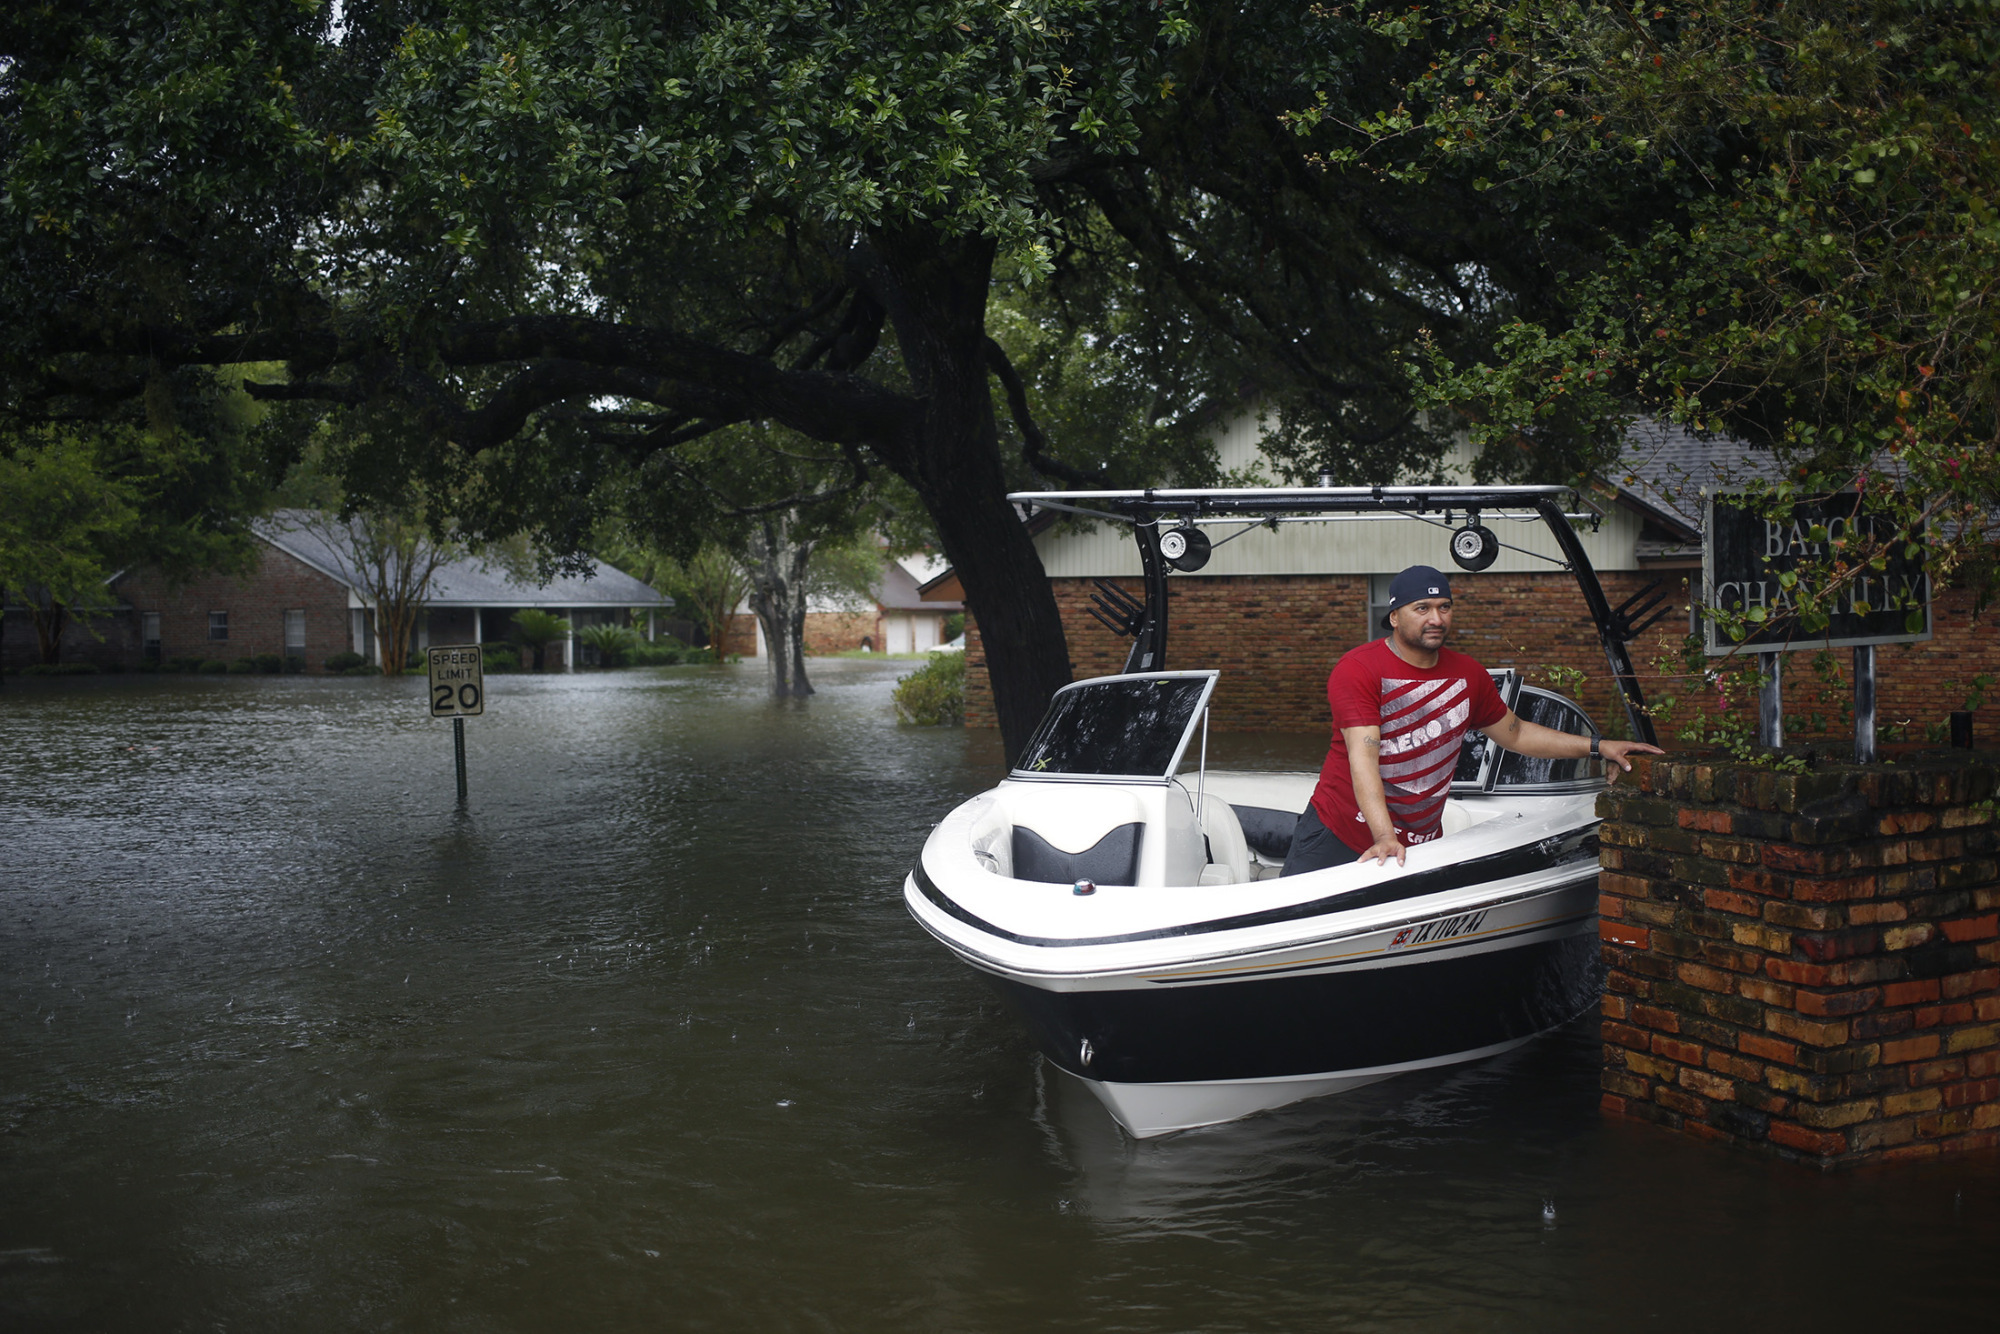 A man waits in a motorboat while making rescues in floodwaters from Hurricane Harvey in Dickinson, Texas, U.S., on Tuesday, Aug. 29, 2017. Estimates for damages caused by Hurricane Harvey are climbing with the storm poised to regain strength in the Gulf of Mexico before crashing back on land. Photographer: Luke Sharrett/Bloomberg